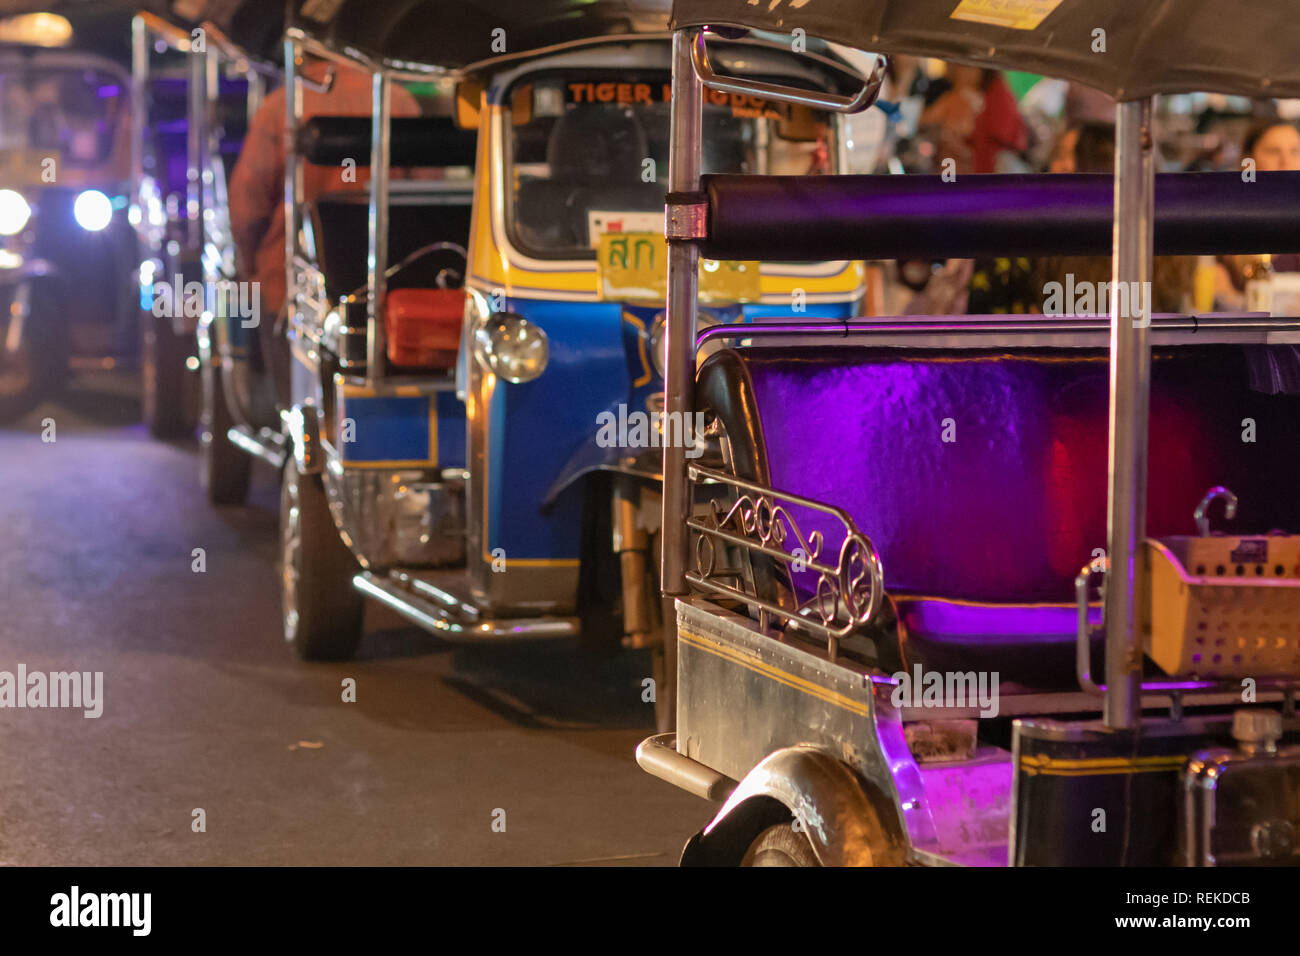 Mueang Chiang Mai, Chiang Mai, Thailand - January 05, 2019: Tuk-tuks lined up waiting on passenges outside of the night market. Stock Photo